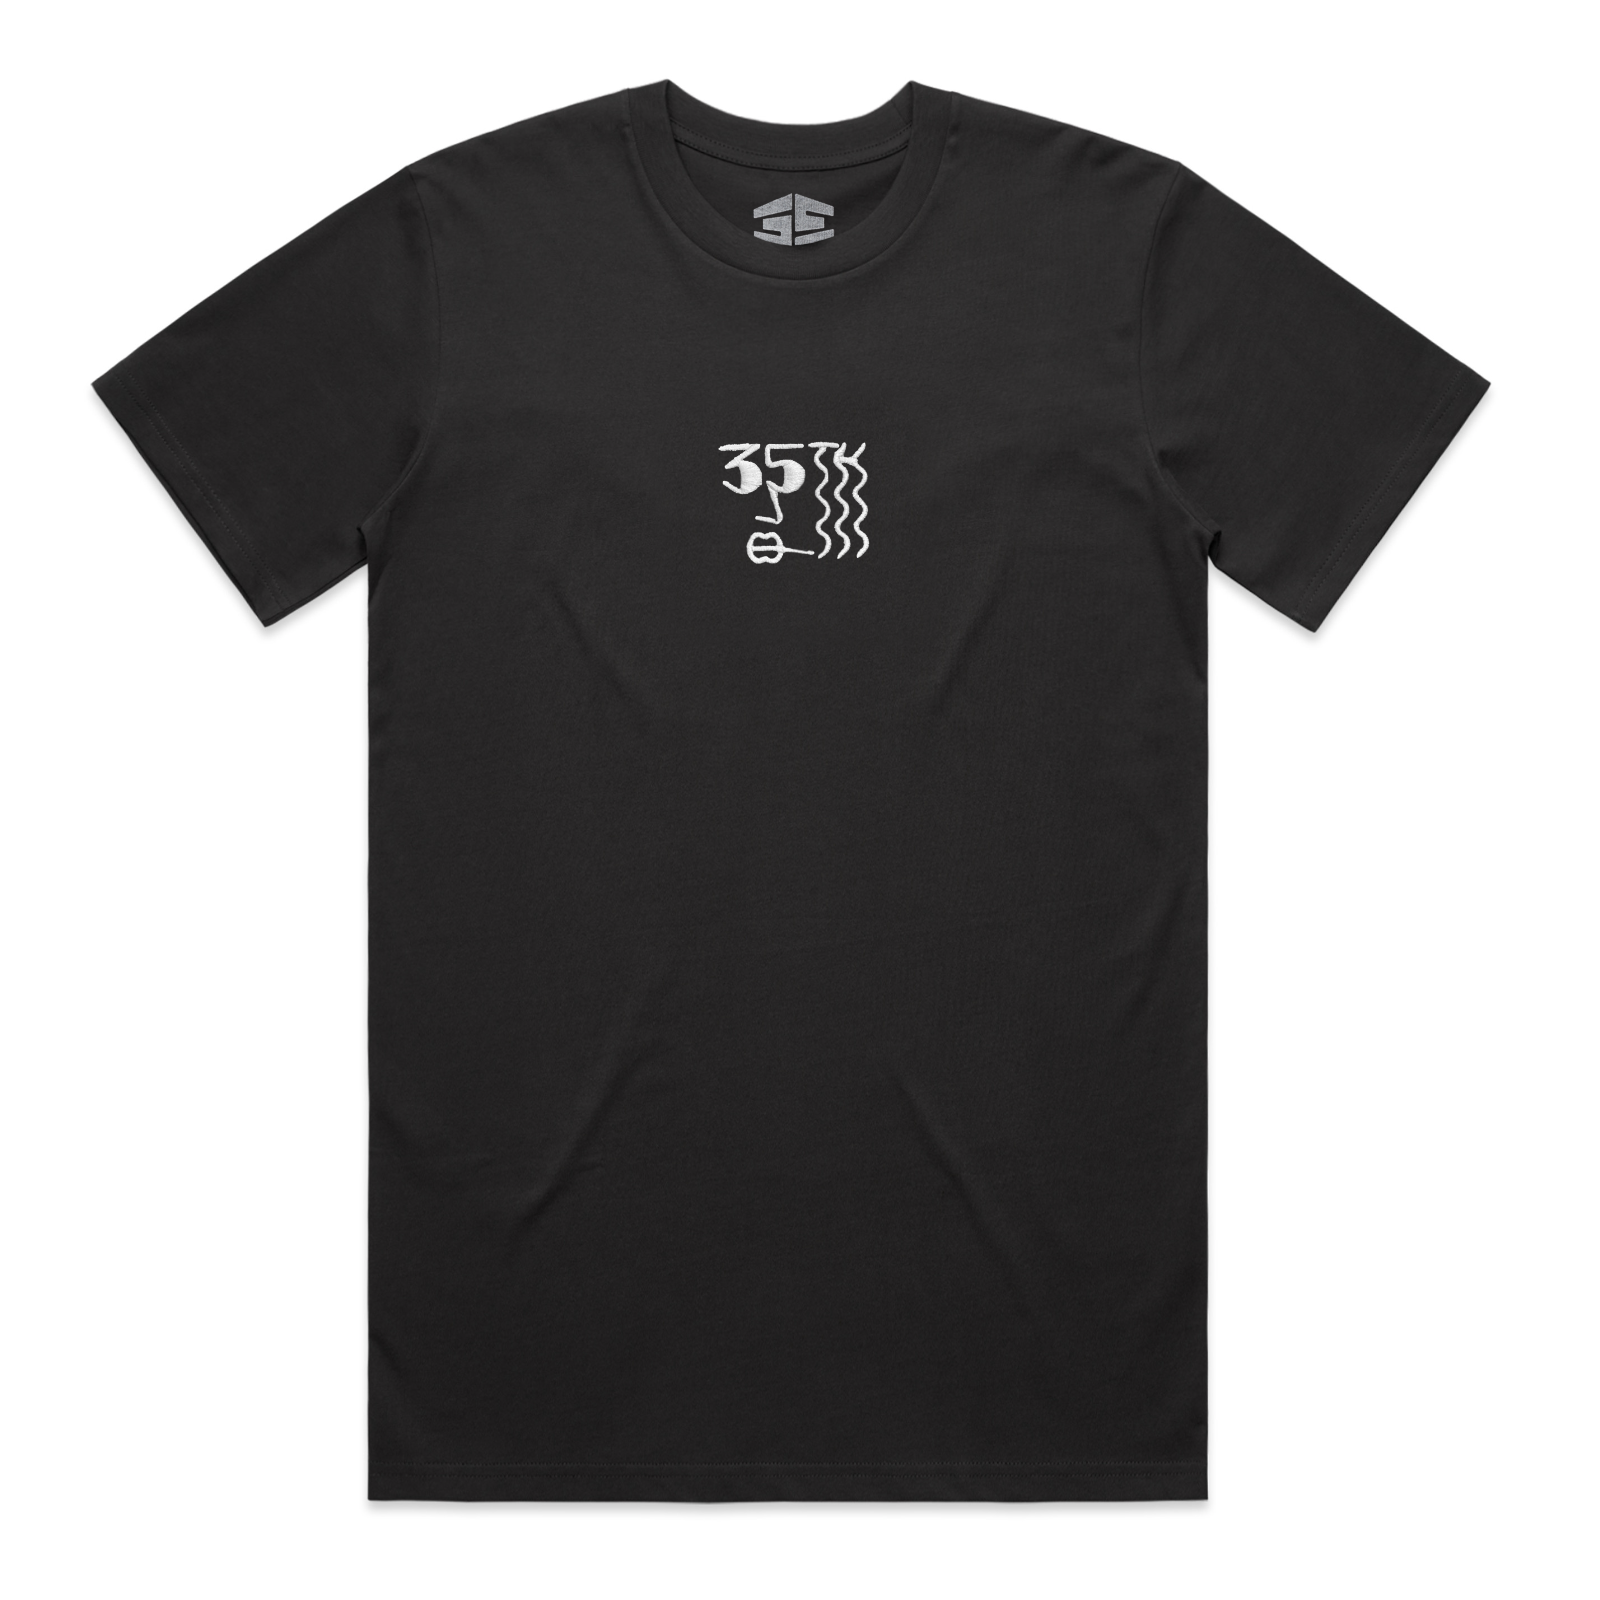 35th North 'Smoker' Embroidered T-Shirt - Coal